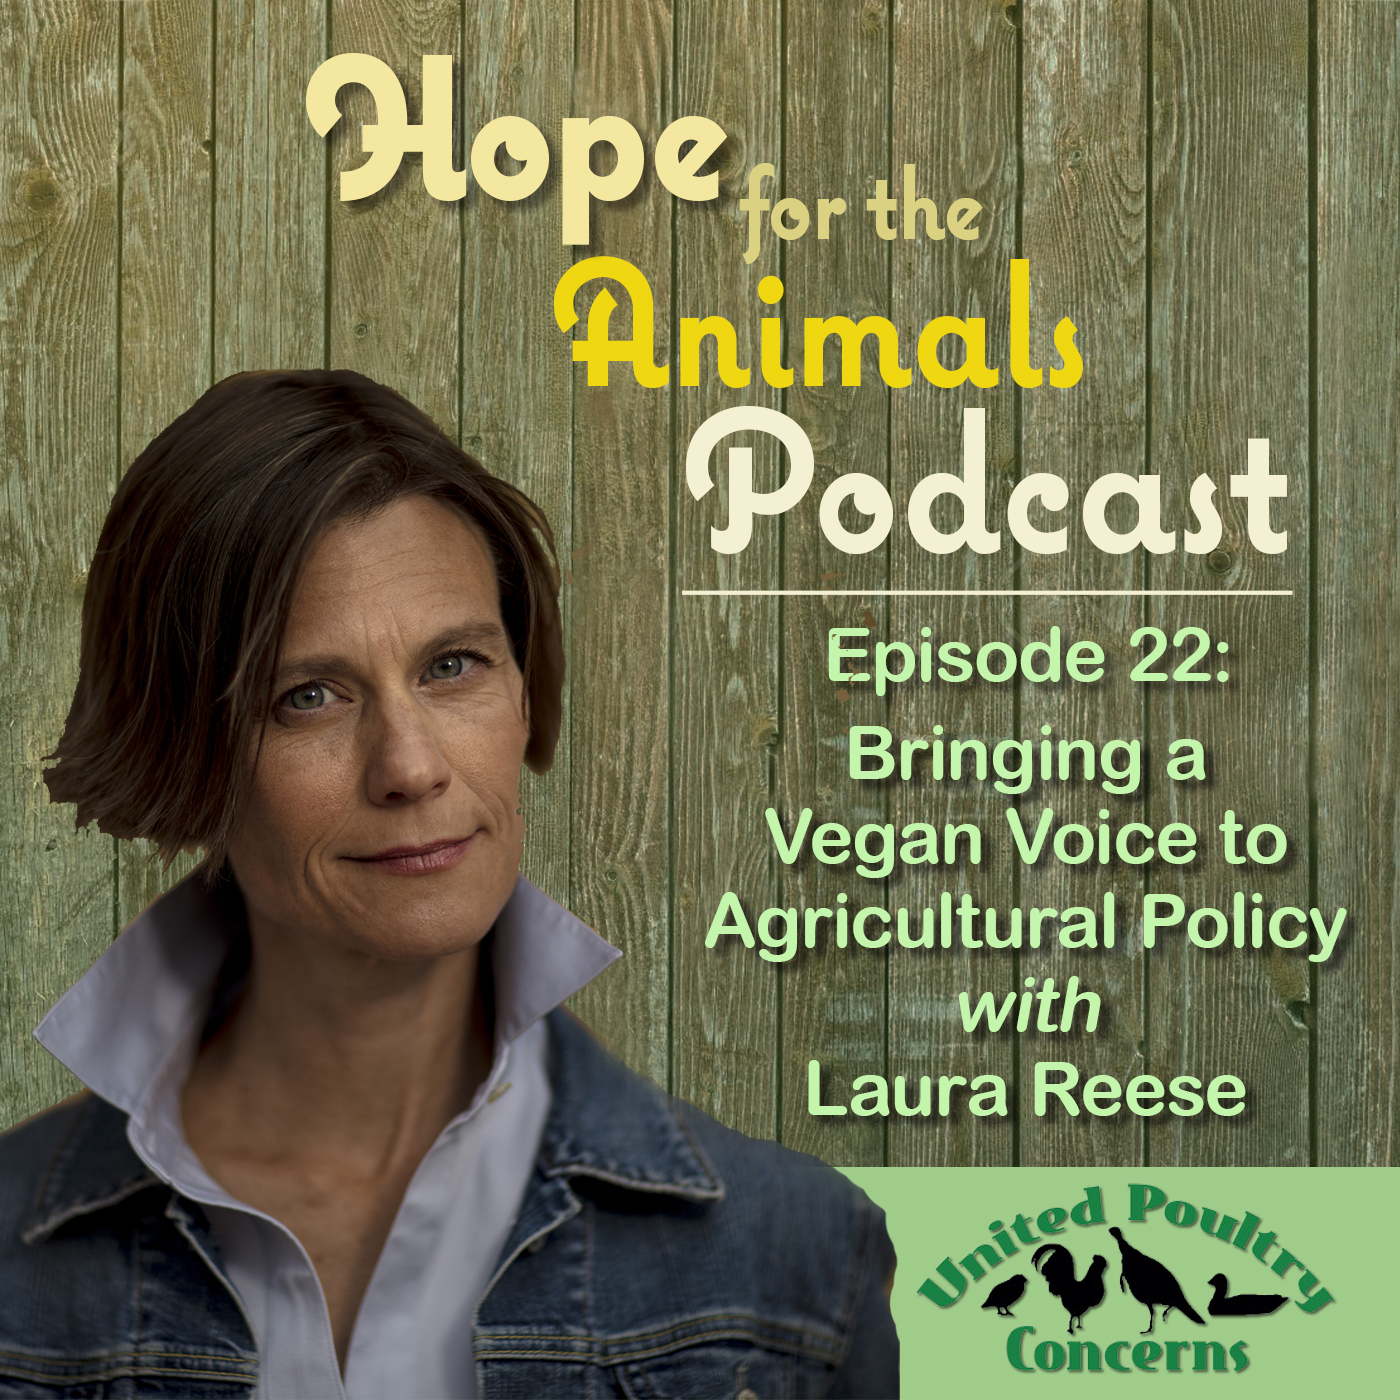 Episode 22: Bringing a Vegan Voice to Agricultural Policy with Laura Reese